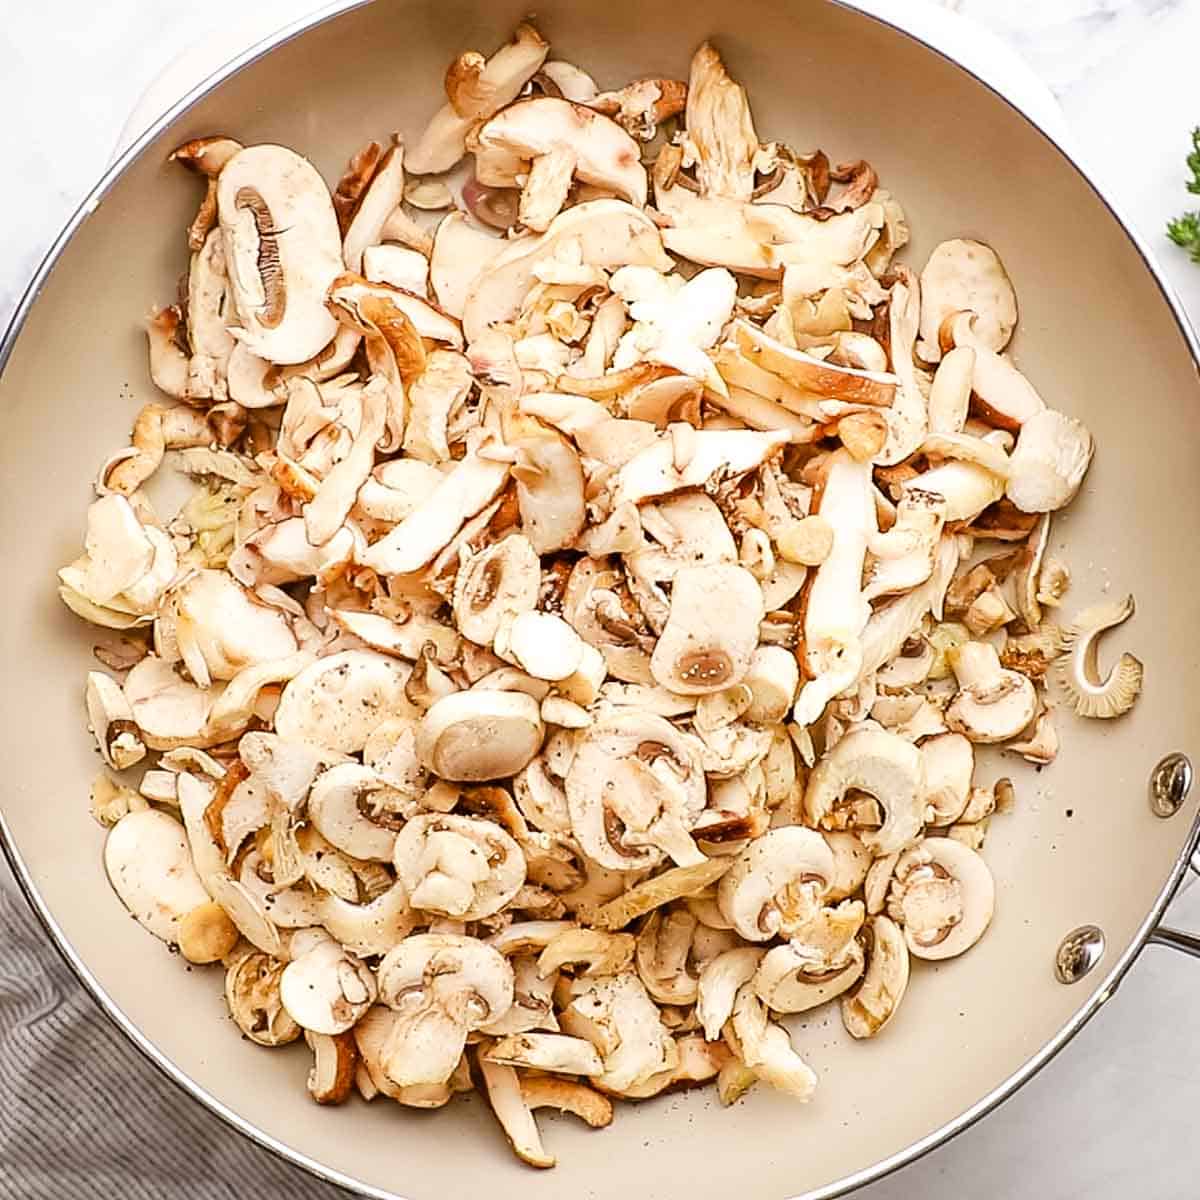 sliced mushrooms added to the pan